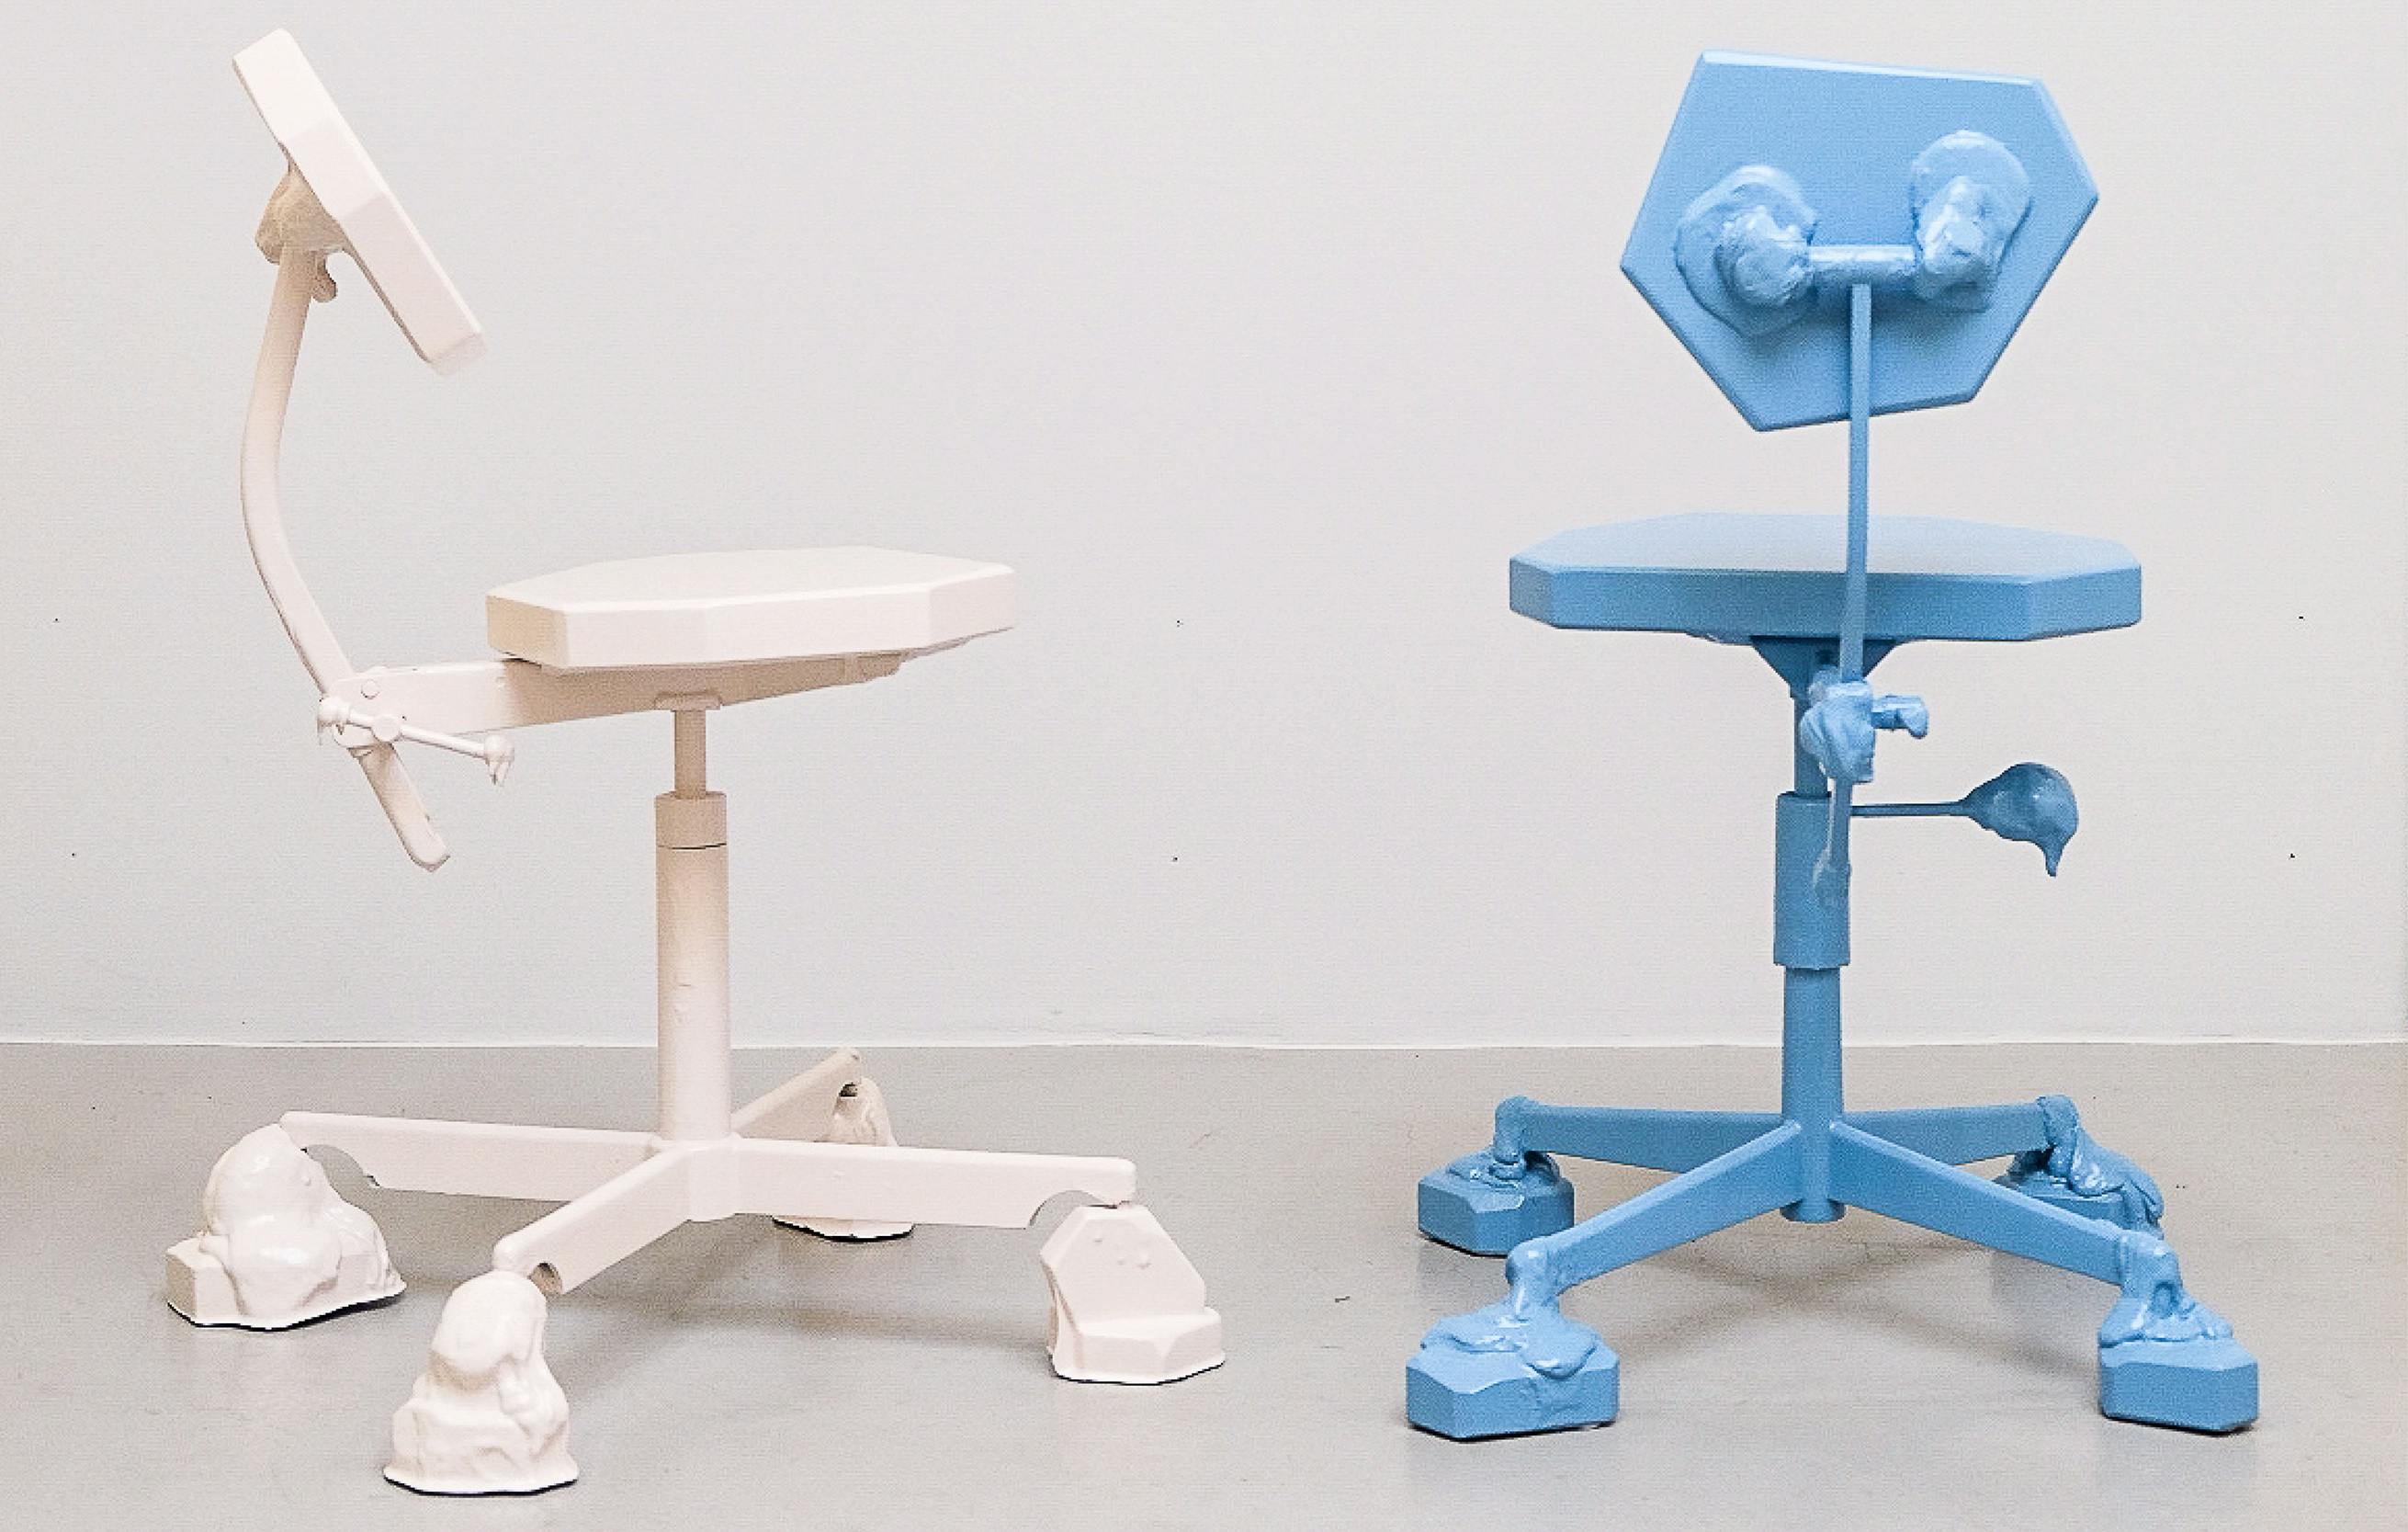 Two desk chairs by Jacob Egeberg for Tableau, Post Service, 'POST SERVICE'. Copenhagen (DK) In 2021